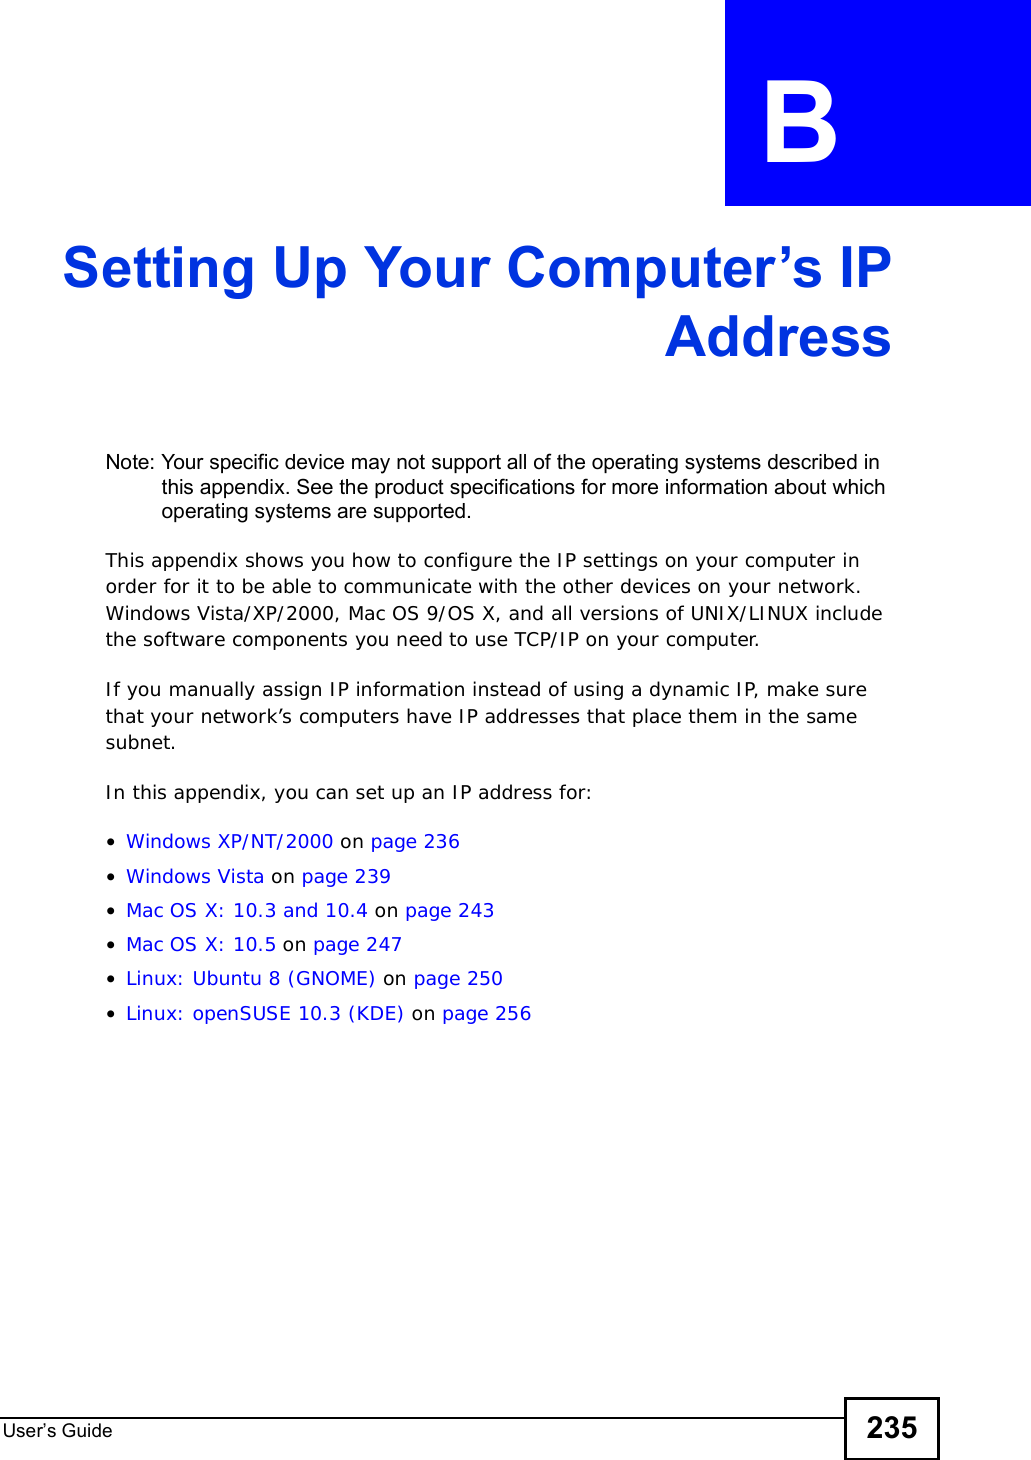 User s Guide 235APPENDIX  B Setting Up Your Computer’s IPAddressNote: Your specific device may not support all of the operating systems described in this appendix. See the product specifications for more information about which operating systems are supported.This appendix shows you how to configure the IP settings on your computer in order for it to be able to communicate with the other devices on your network. Windows Vista/XP/2000, Mac OS 9/OS X, and all versions of UNIX/LINUX include the software components you need to use TCP/IP on your computer. If you manually assign IP information instead of using a dynamic IP, make sure that your network’s computers have IP addresses that place them in the same subnet.In this appendix, you can set up an IP address for:•Windows XP/NT/2000 on page236•Windows Vista on page239•Mac OS X: 10.3 and 10.4 on page243•Mac OS X: 10.5 on page247•Linux: Ubuntu 8 (GNOME) on page 250•Linux: openSUSE 10.3 (KDE) on page256